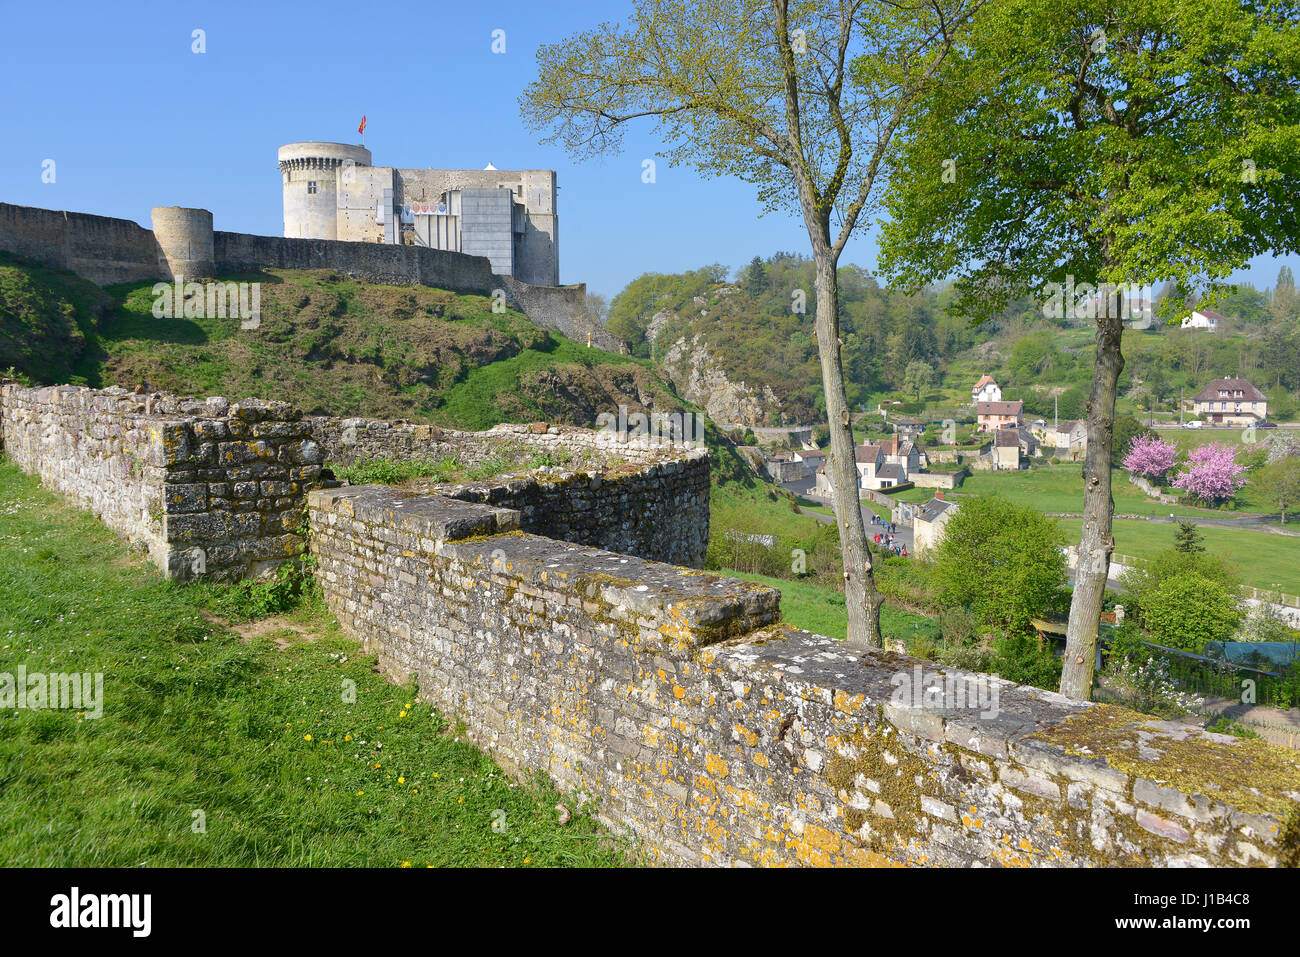 Castle of William the Conqueror of Falaise, a commune in the Calvados department in the Basse-Normandie region in northwestern France Stock Photo